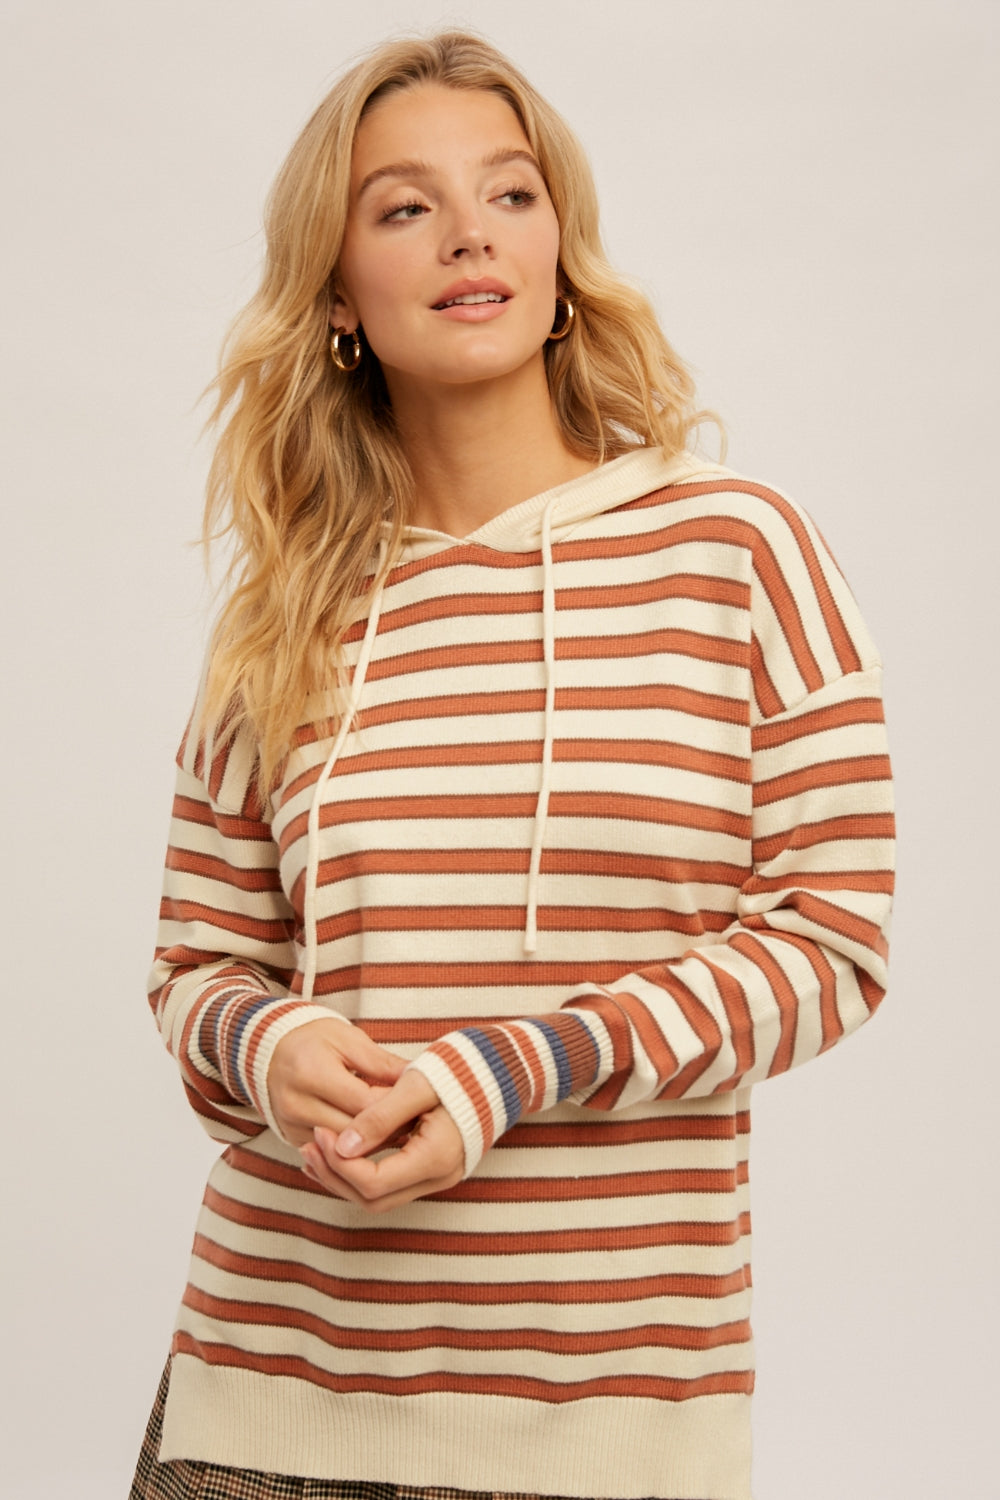 Ivory and Camel Striped Colorblock Hoodie